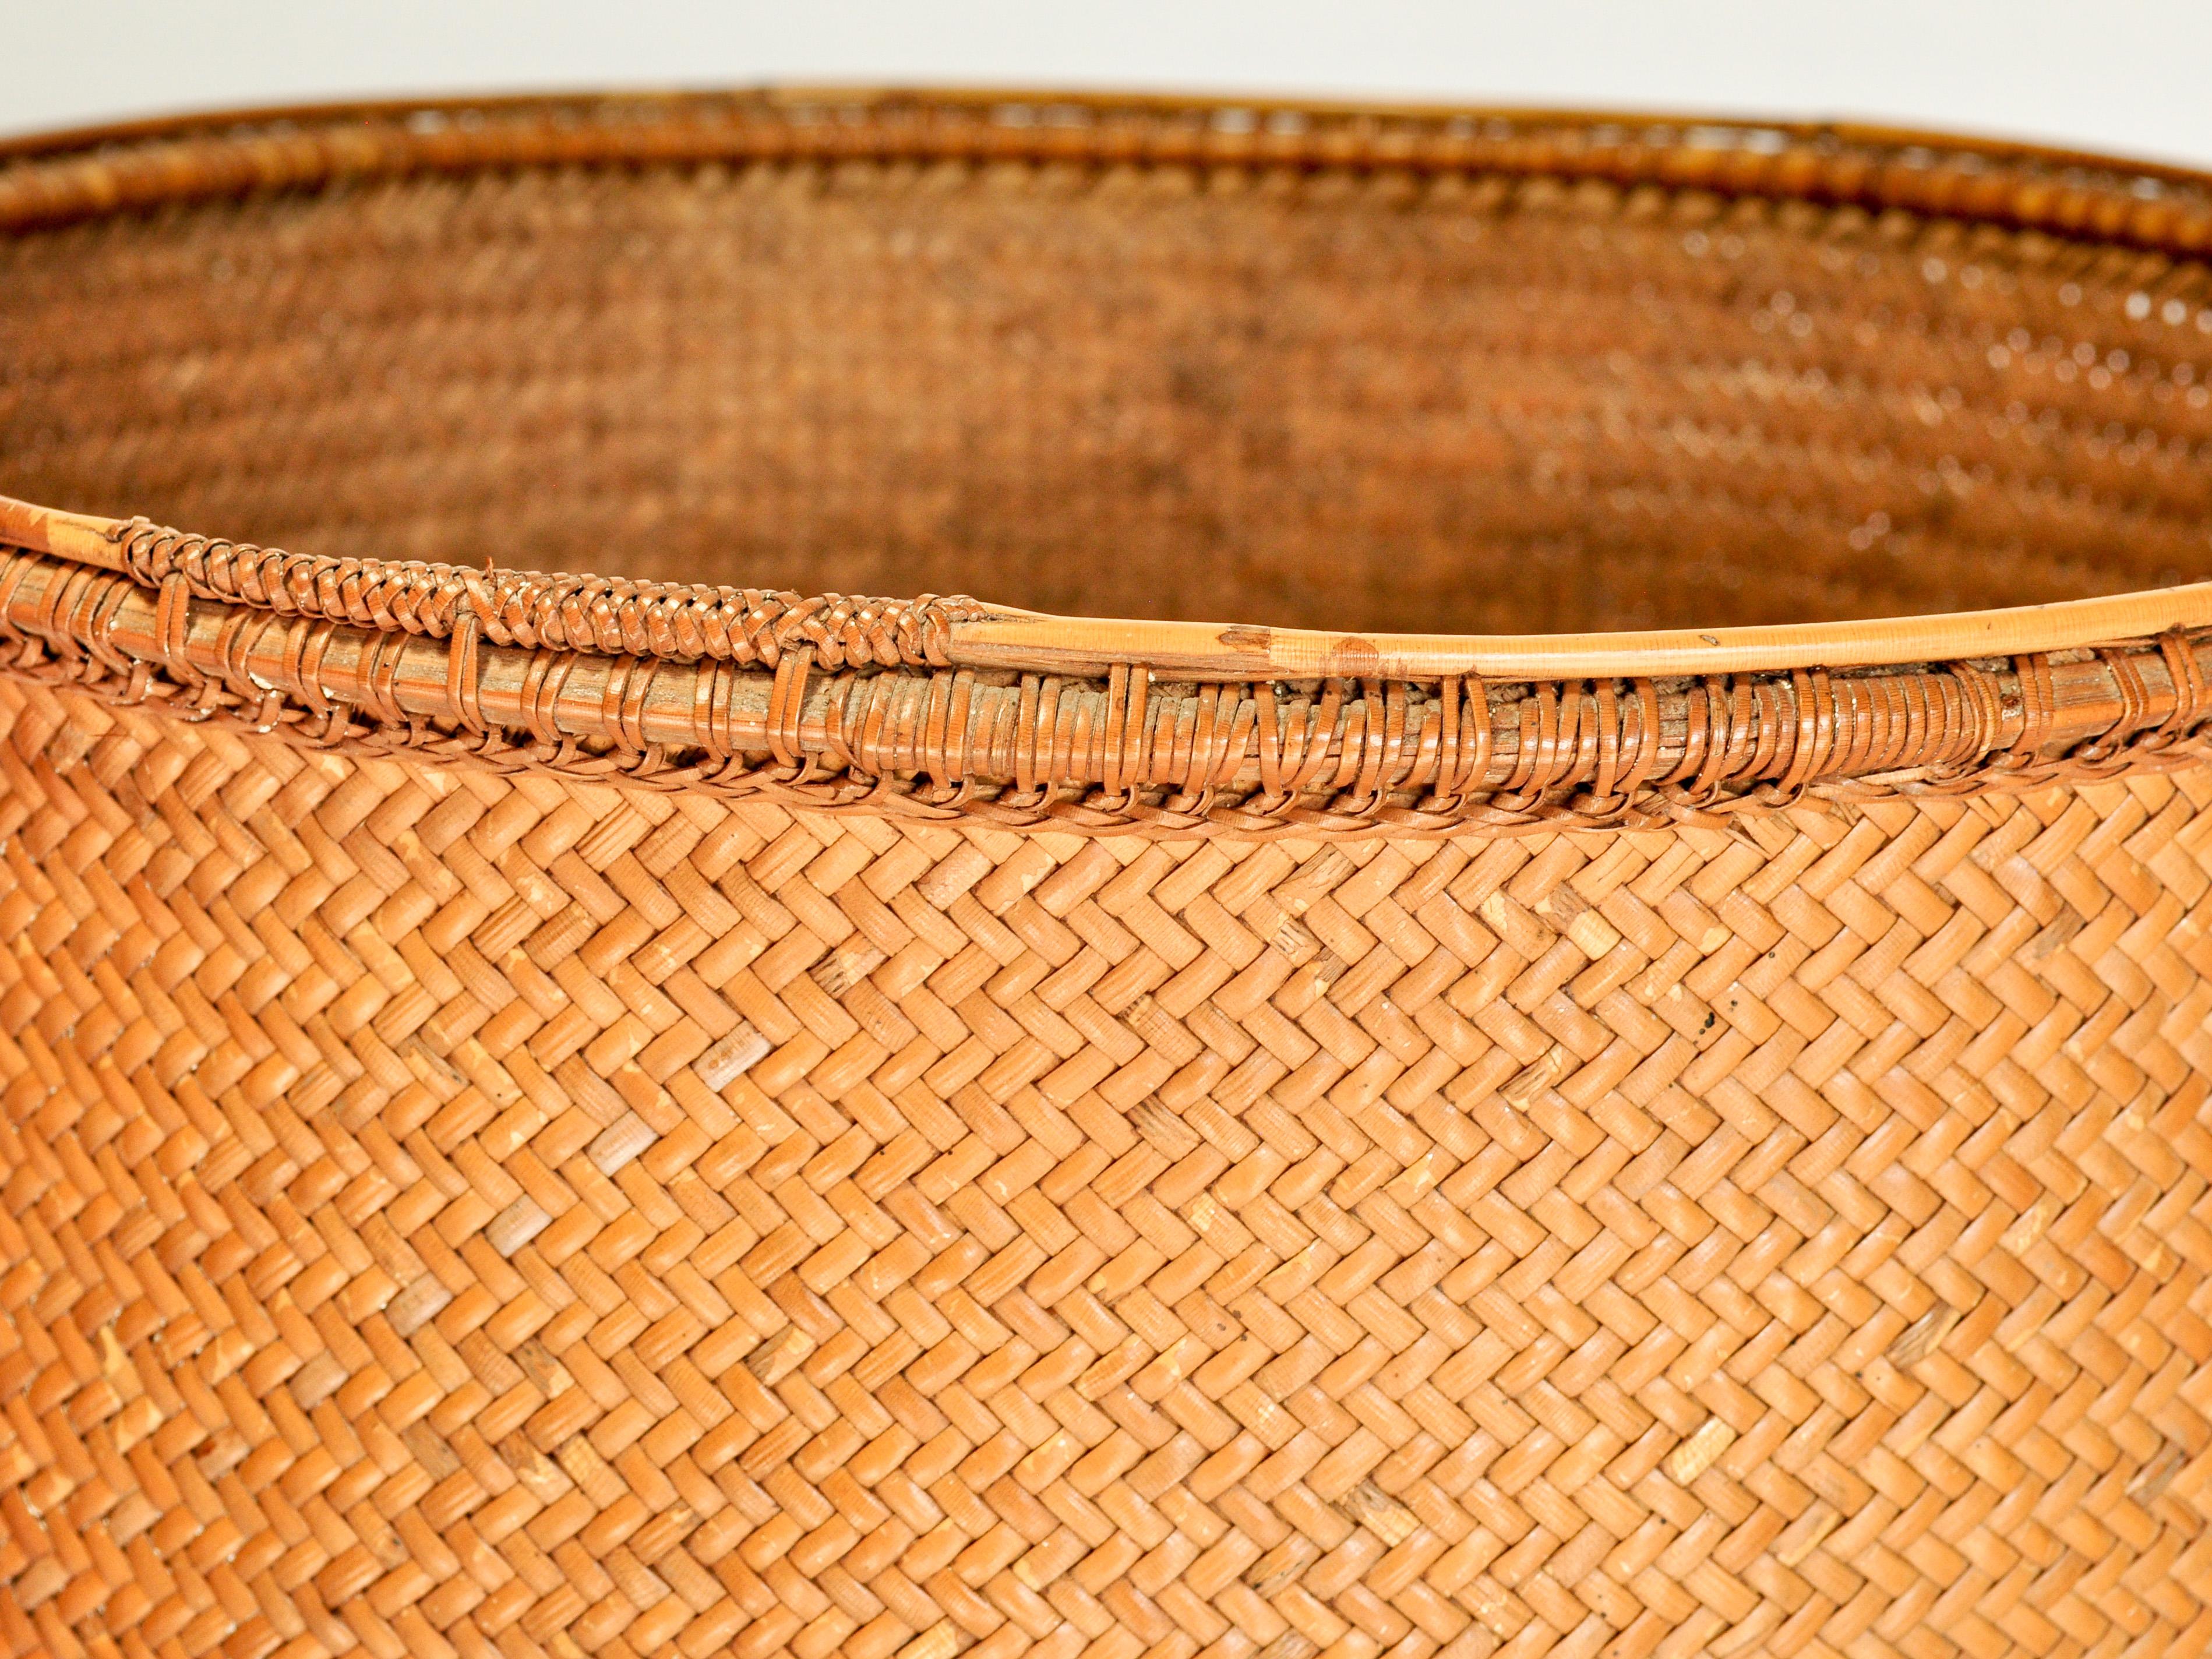 Hand-Crafted Vintage Collecting Basket Dayak of Borneo, Mid-20th Century